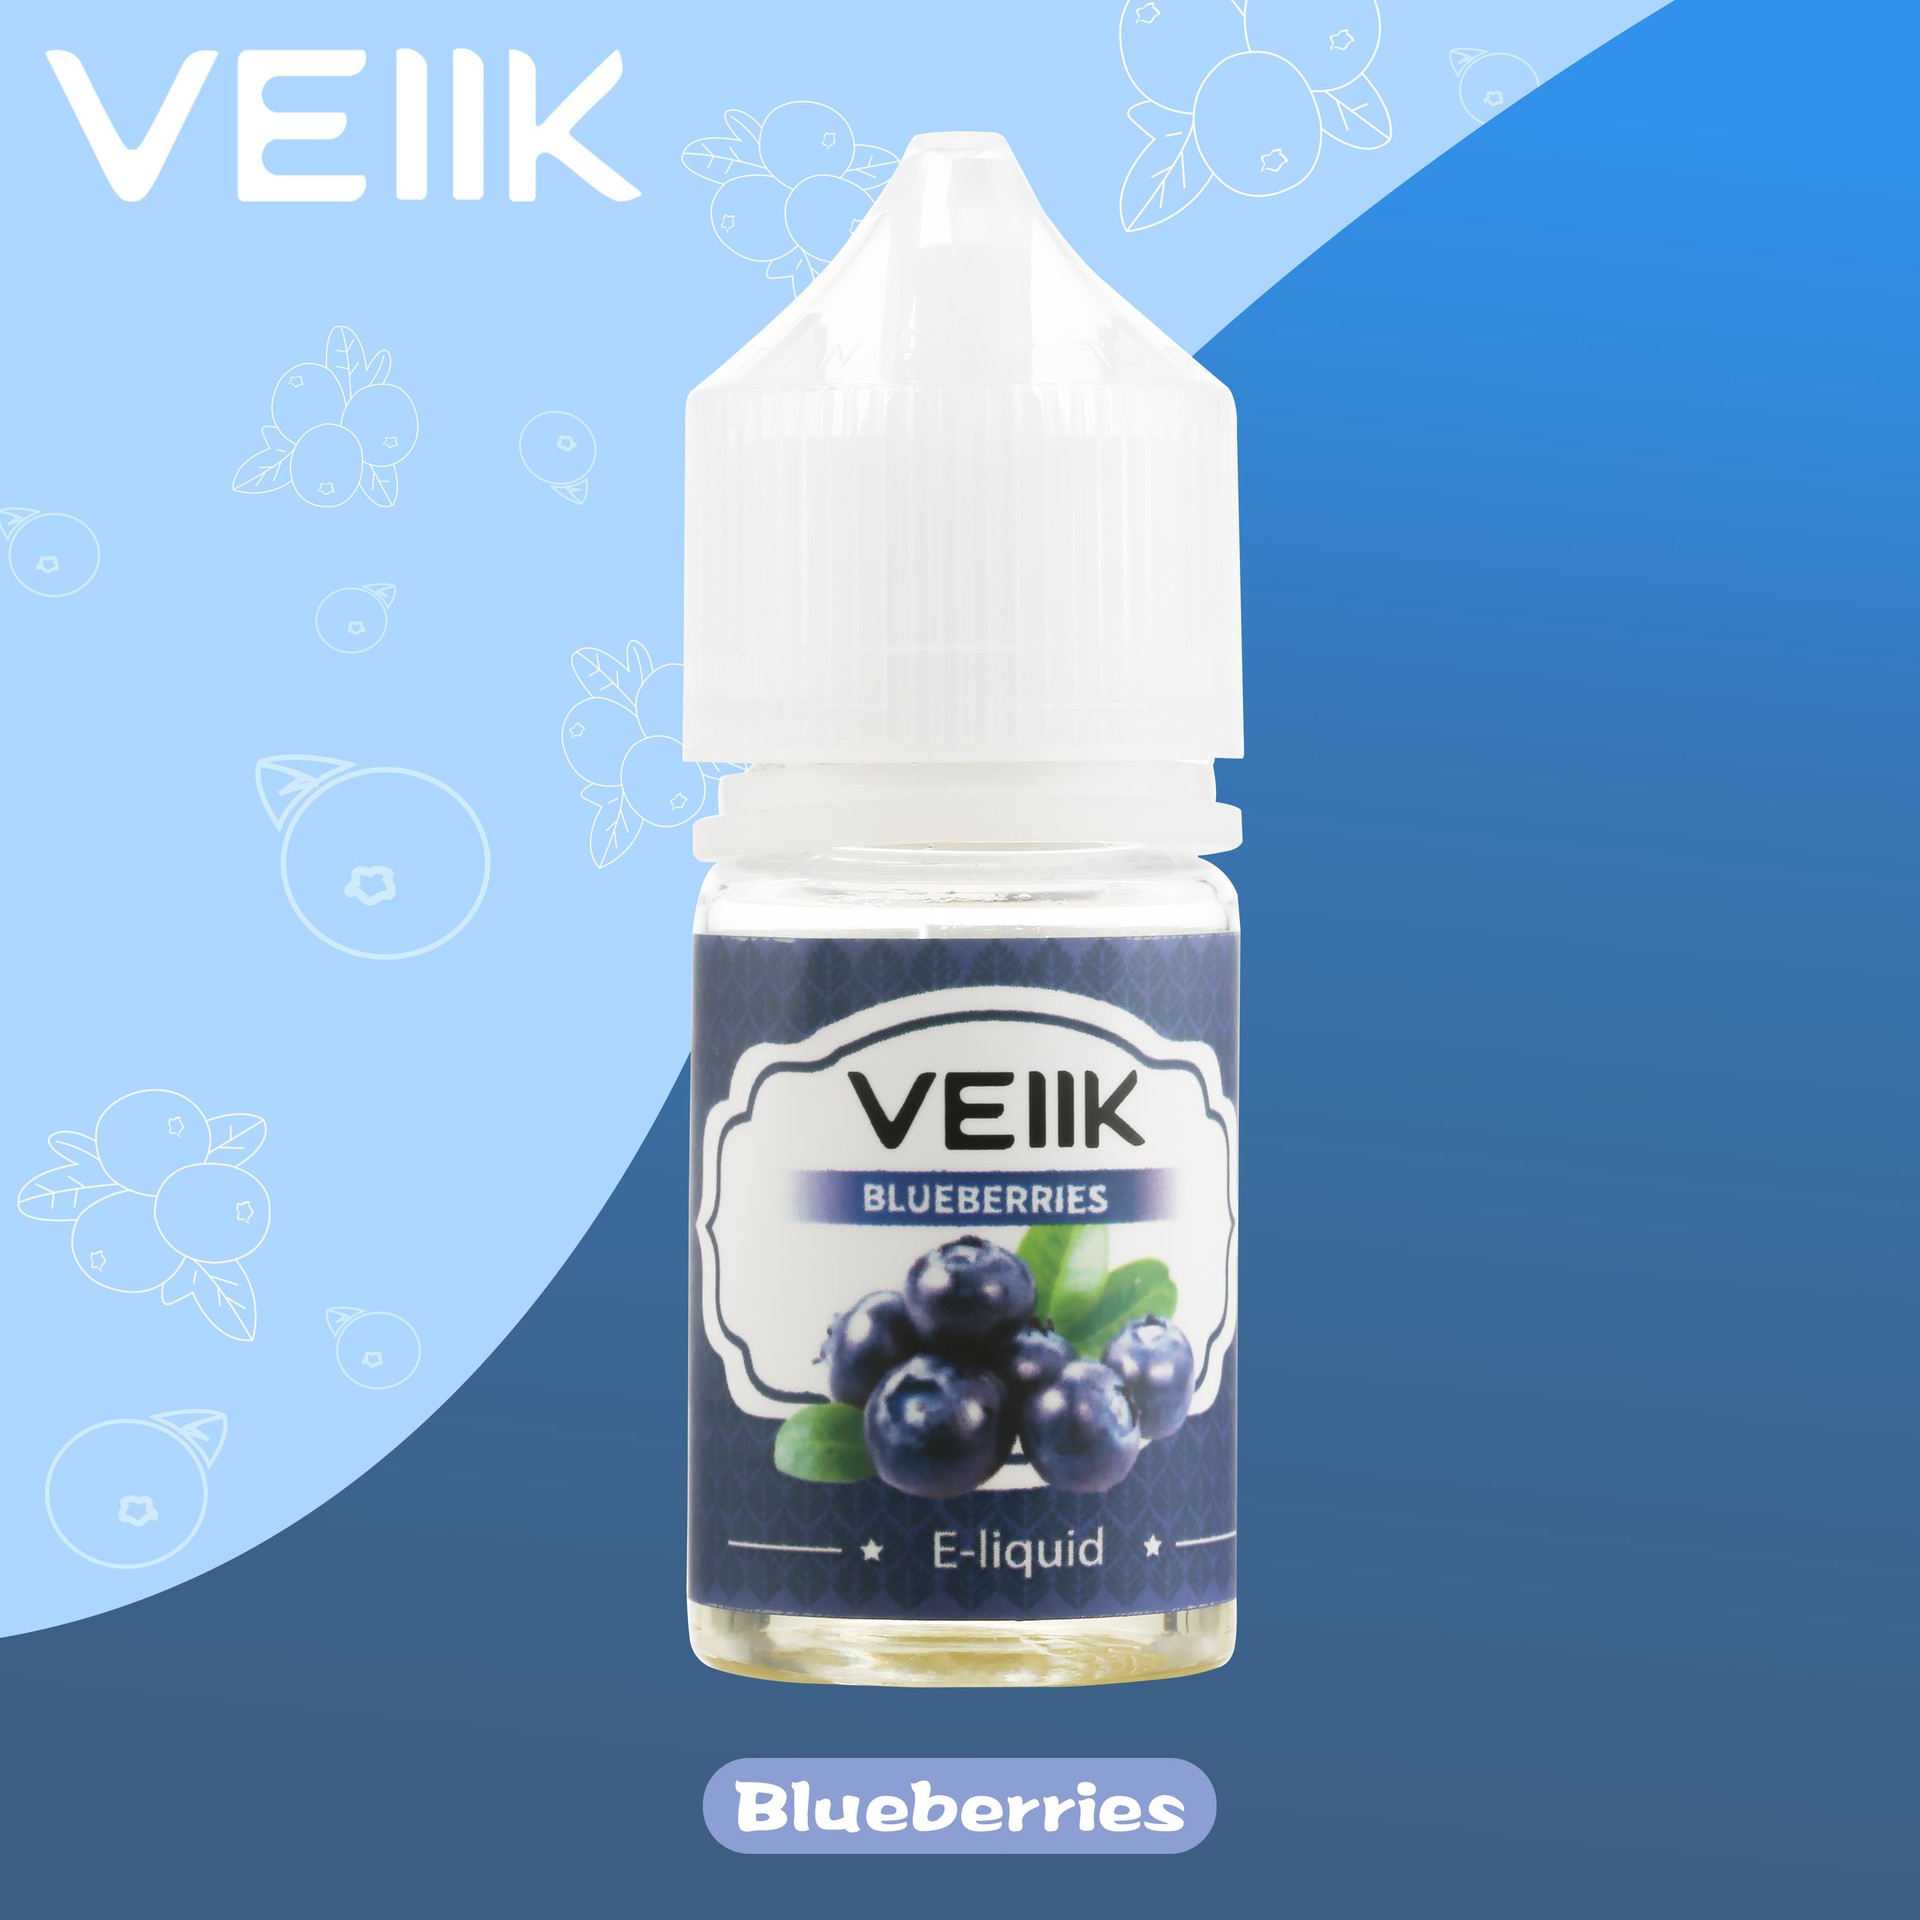 VEIIK exquisite electronic cigarette accessories great for vape pods